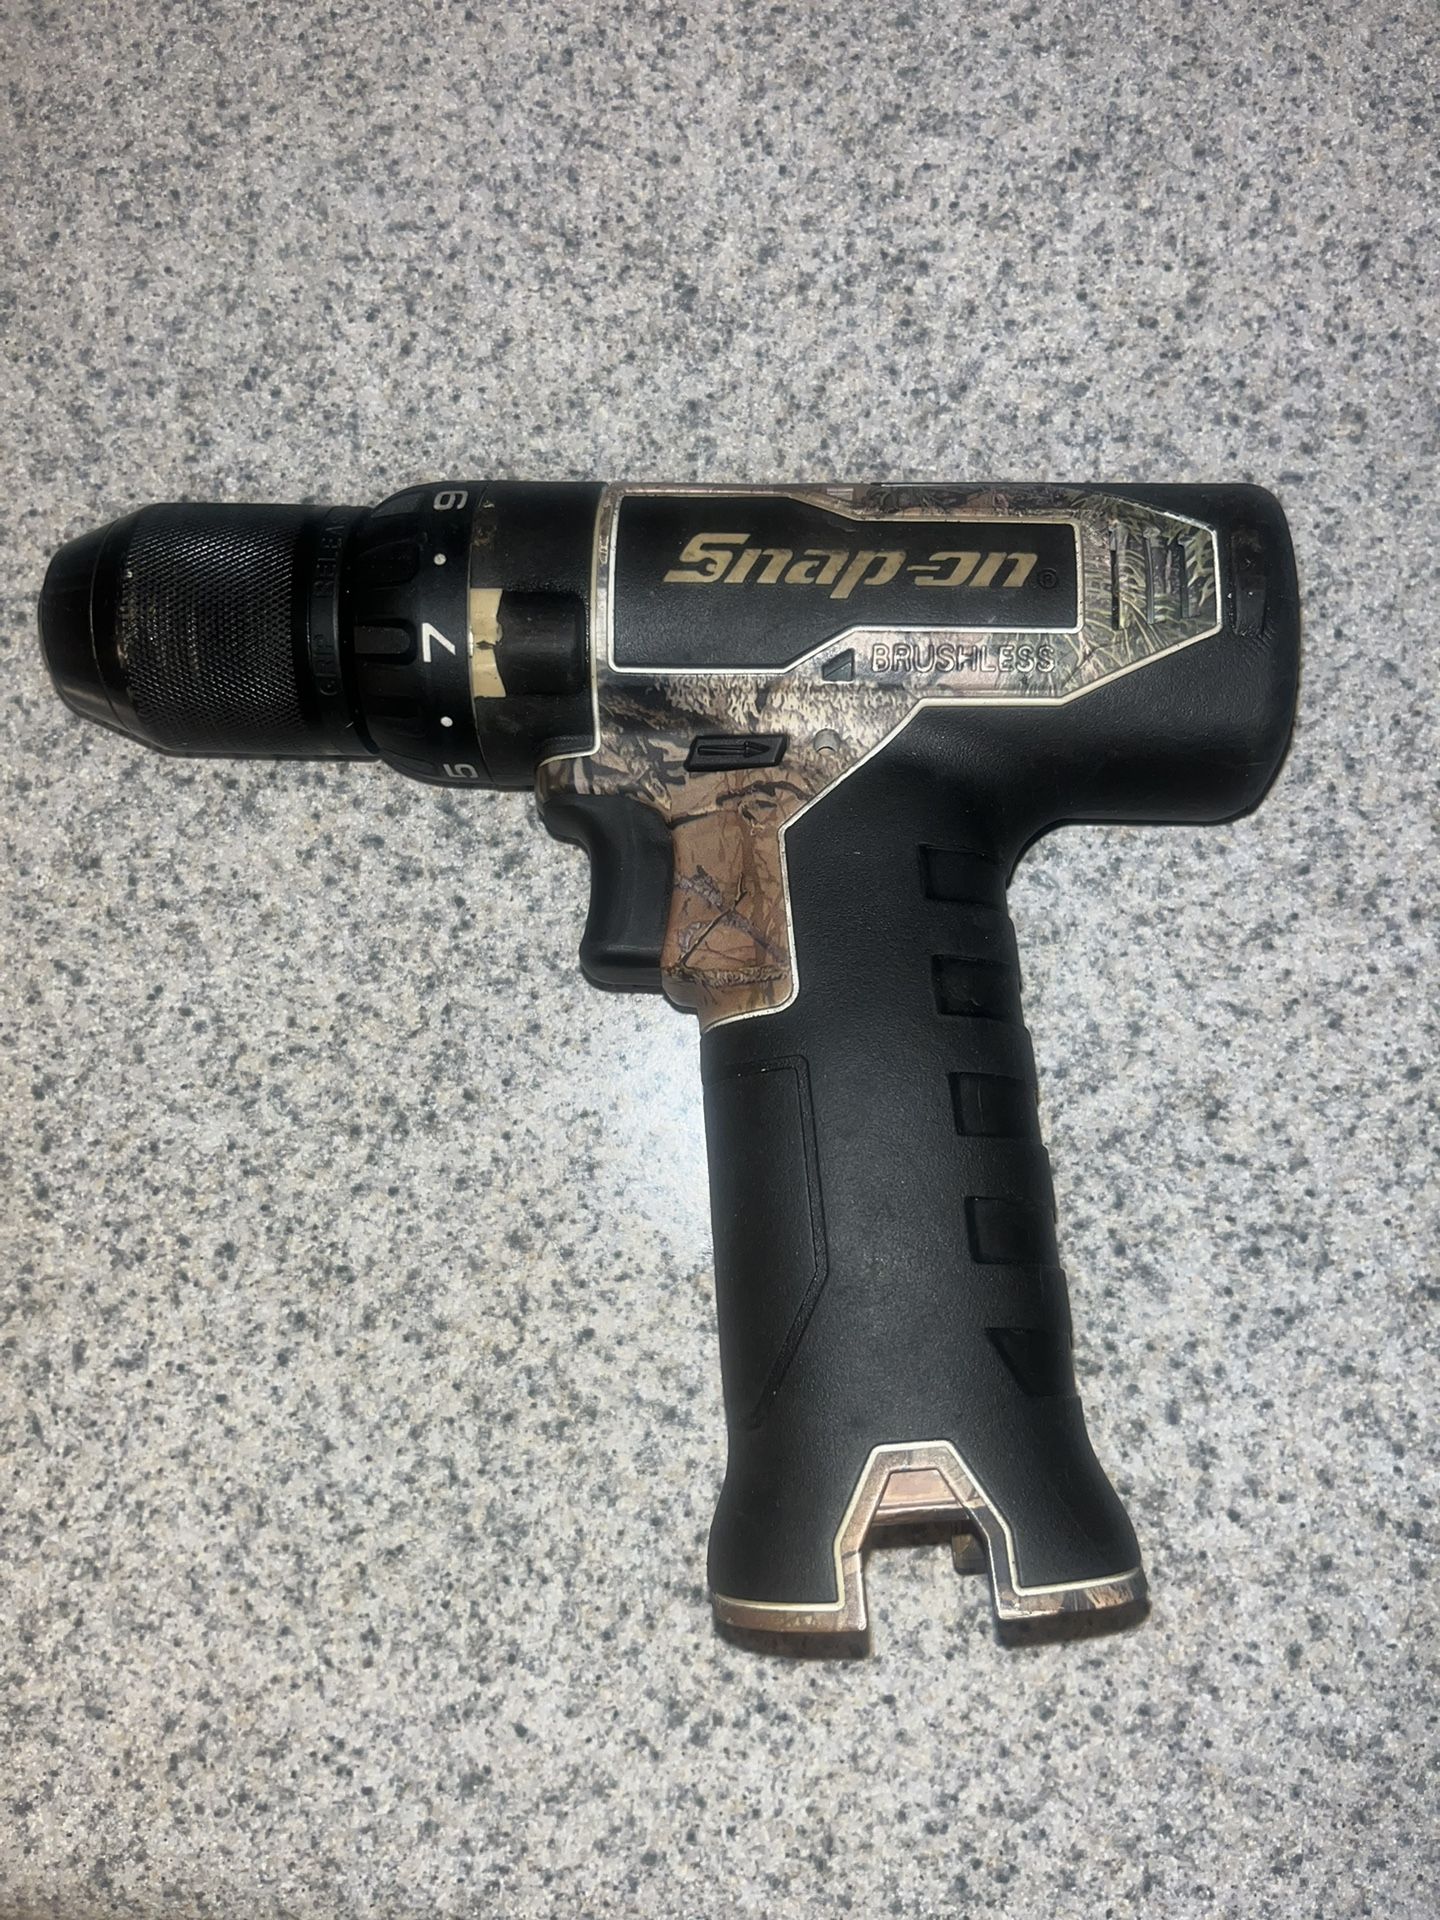 Snap On 14.4 Brushless Drill Camo